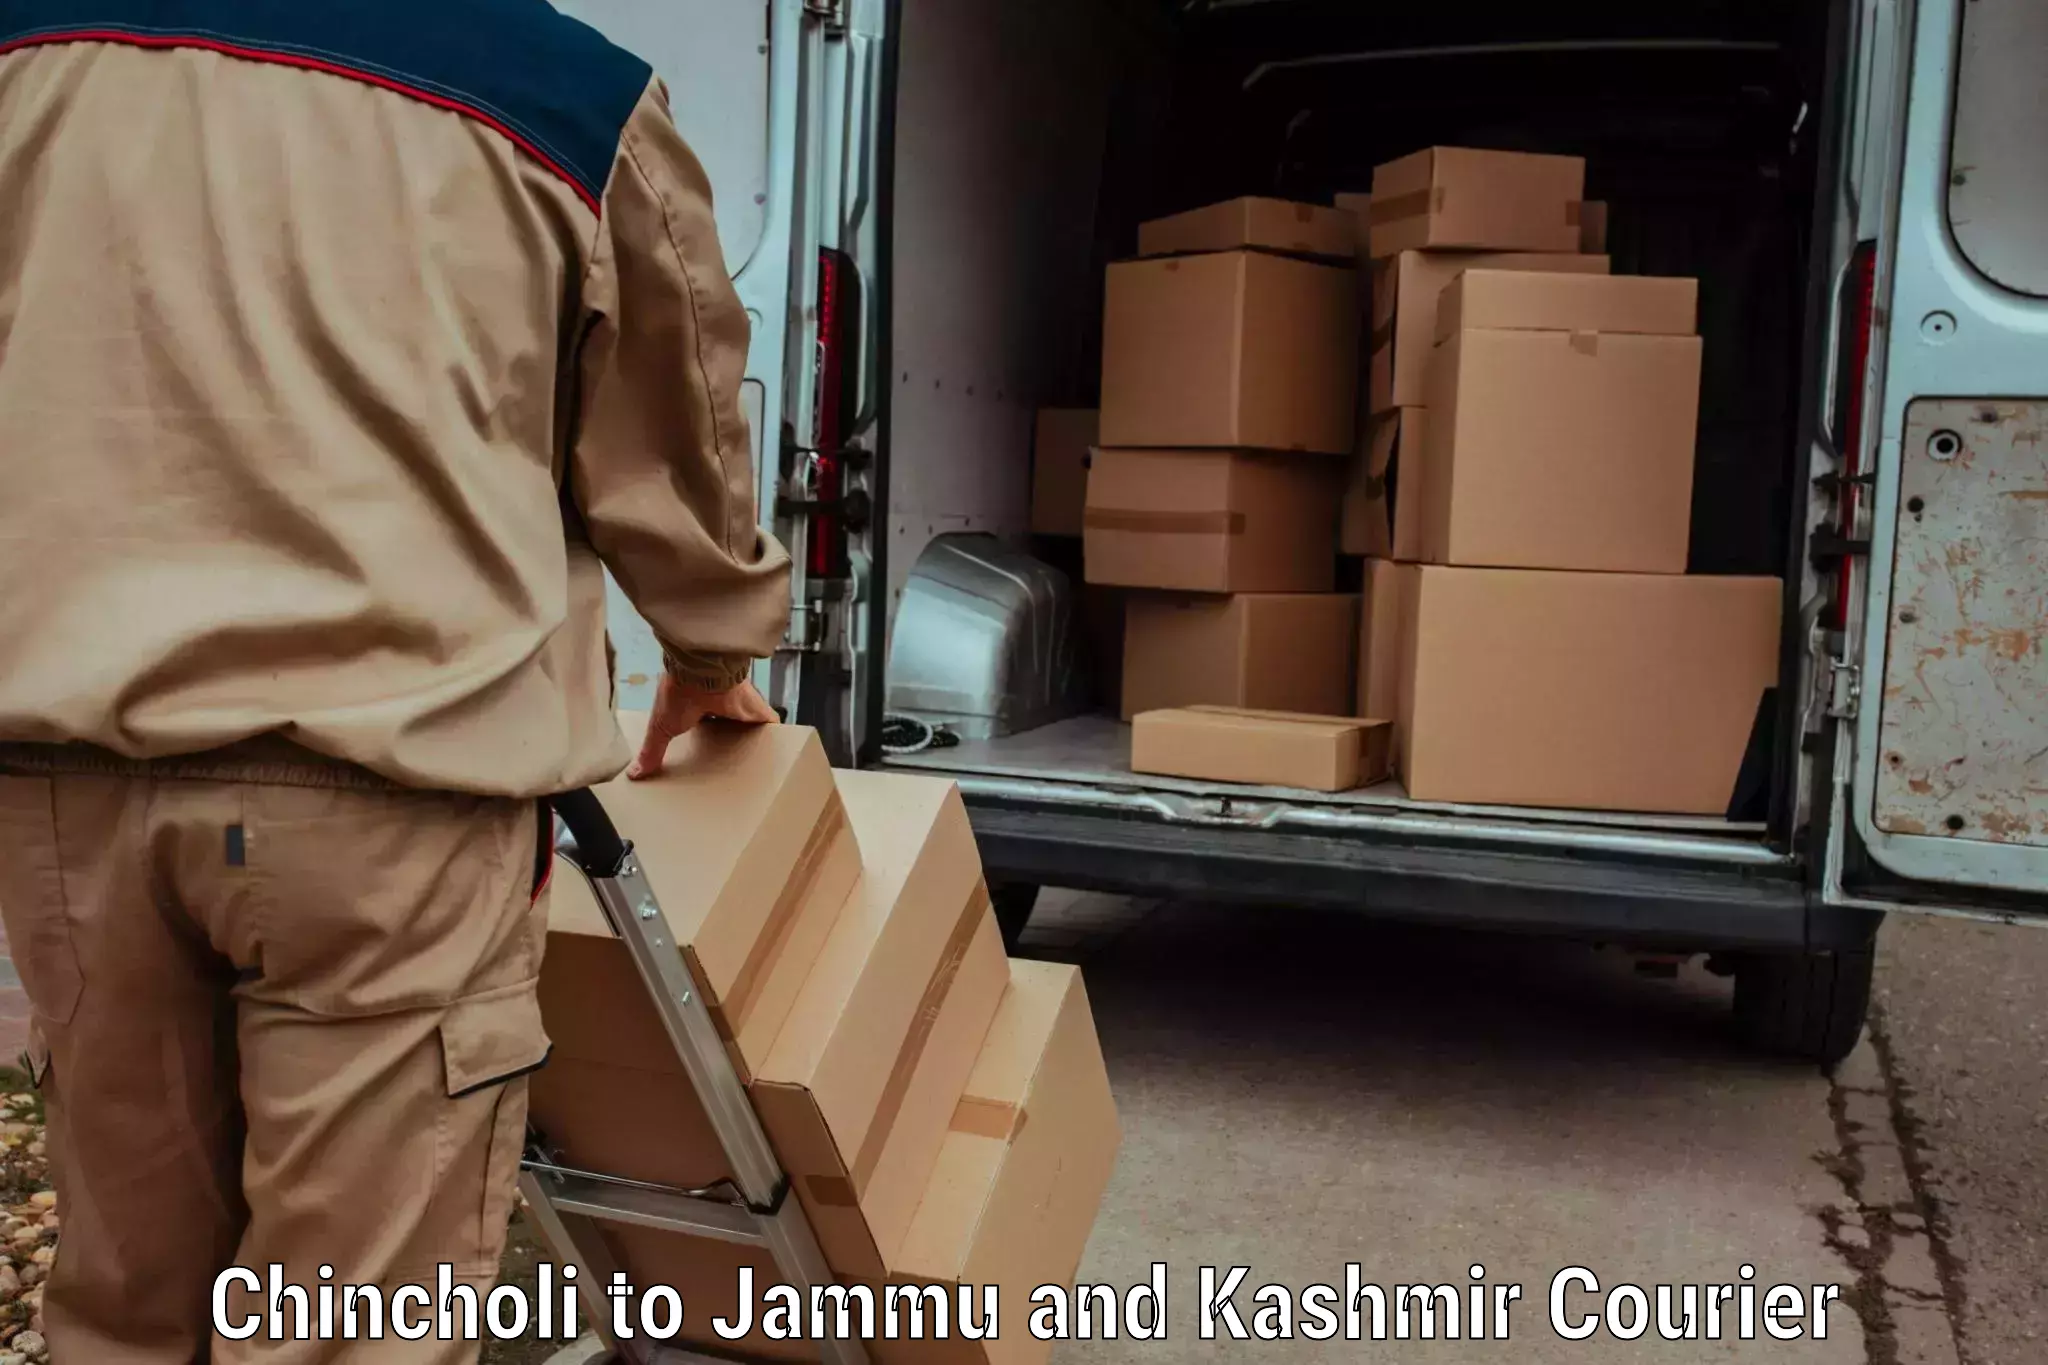 Professional courier handling Chincholi to Leh